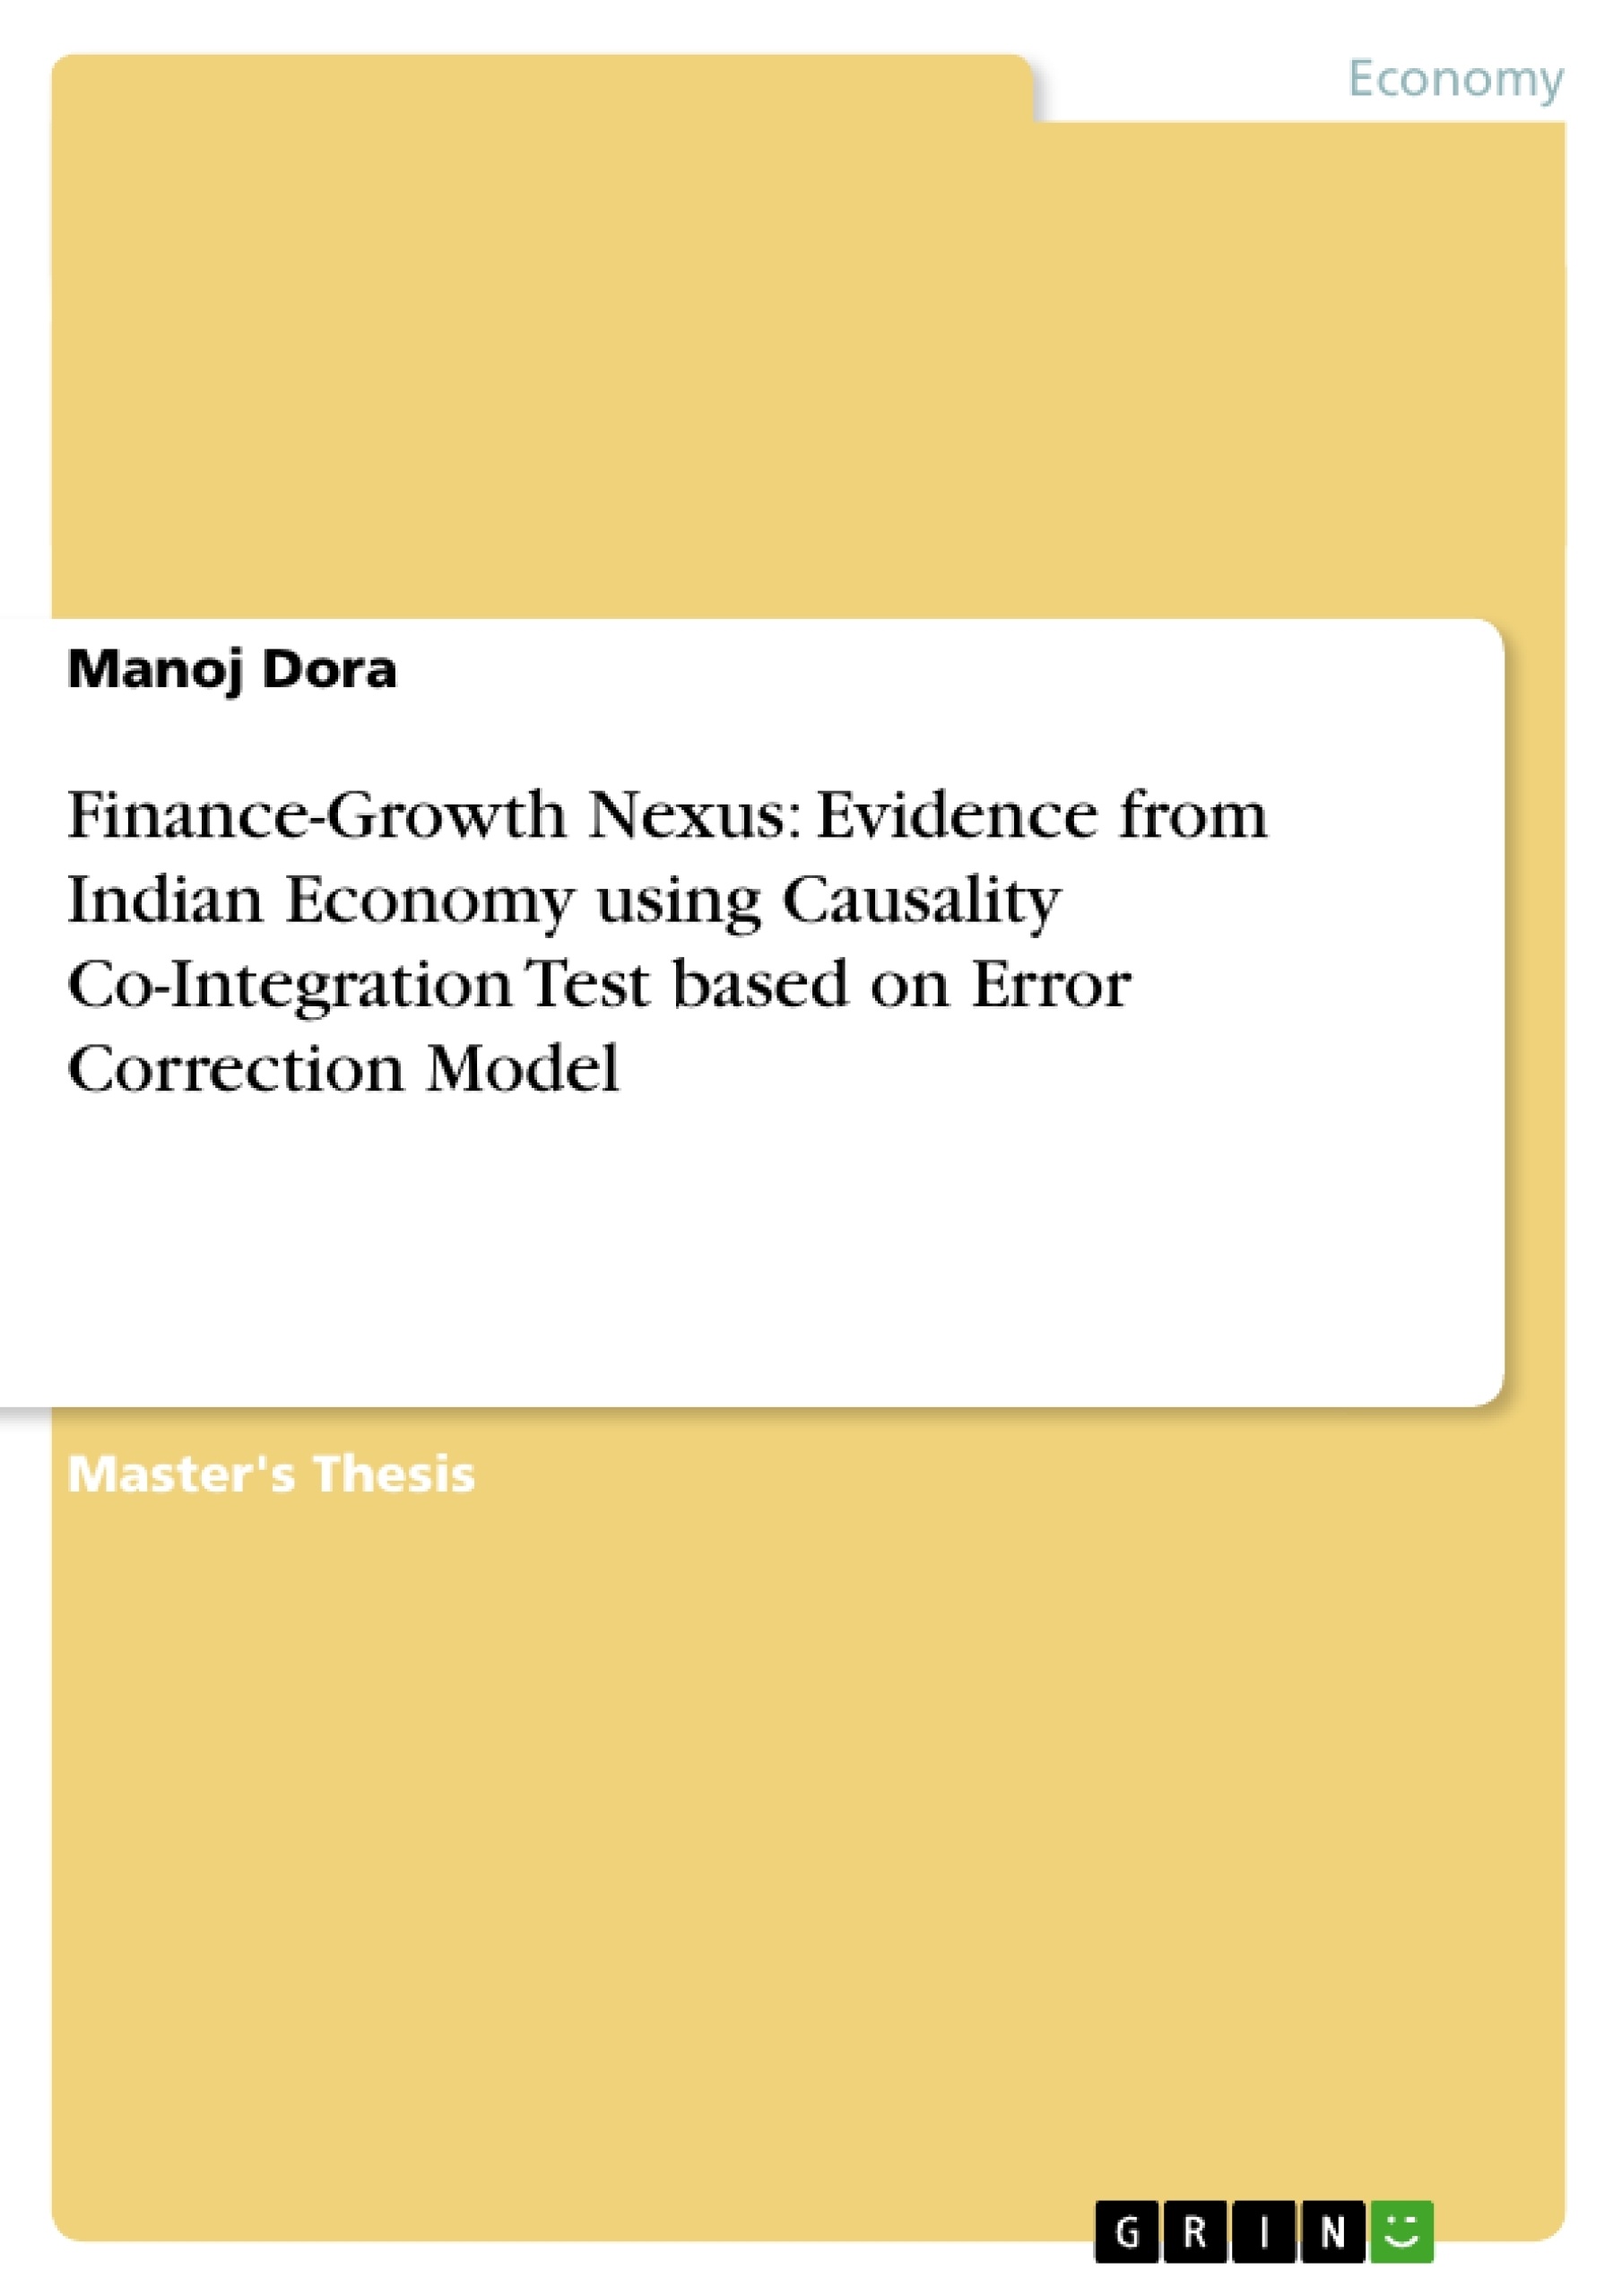 Title: Finance-Growth Nexus: Evidence from Indian Economy using Causality Co-Integration Test based on Error Correction Model